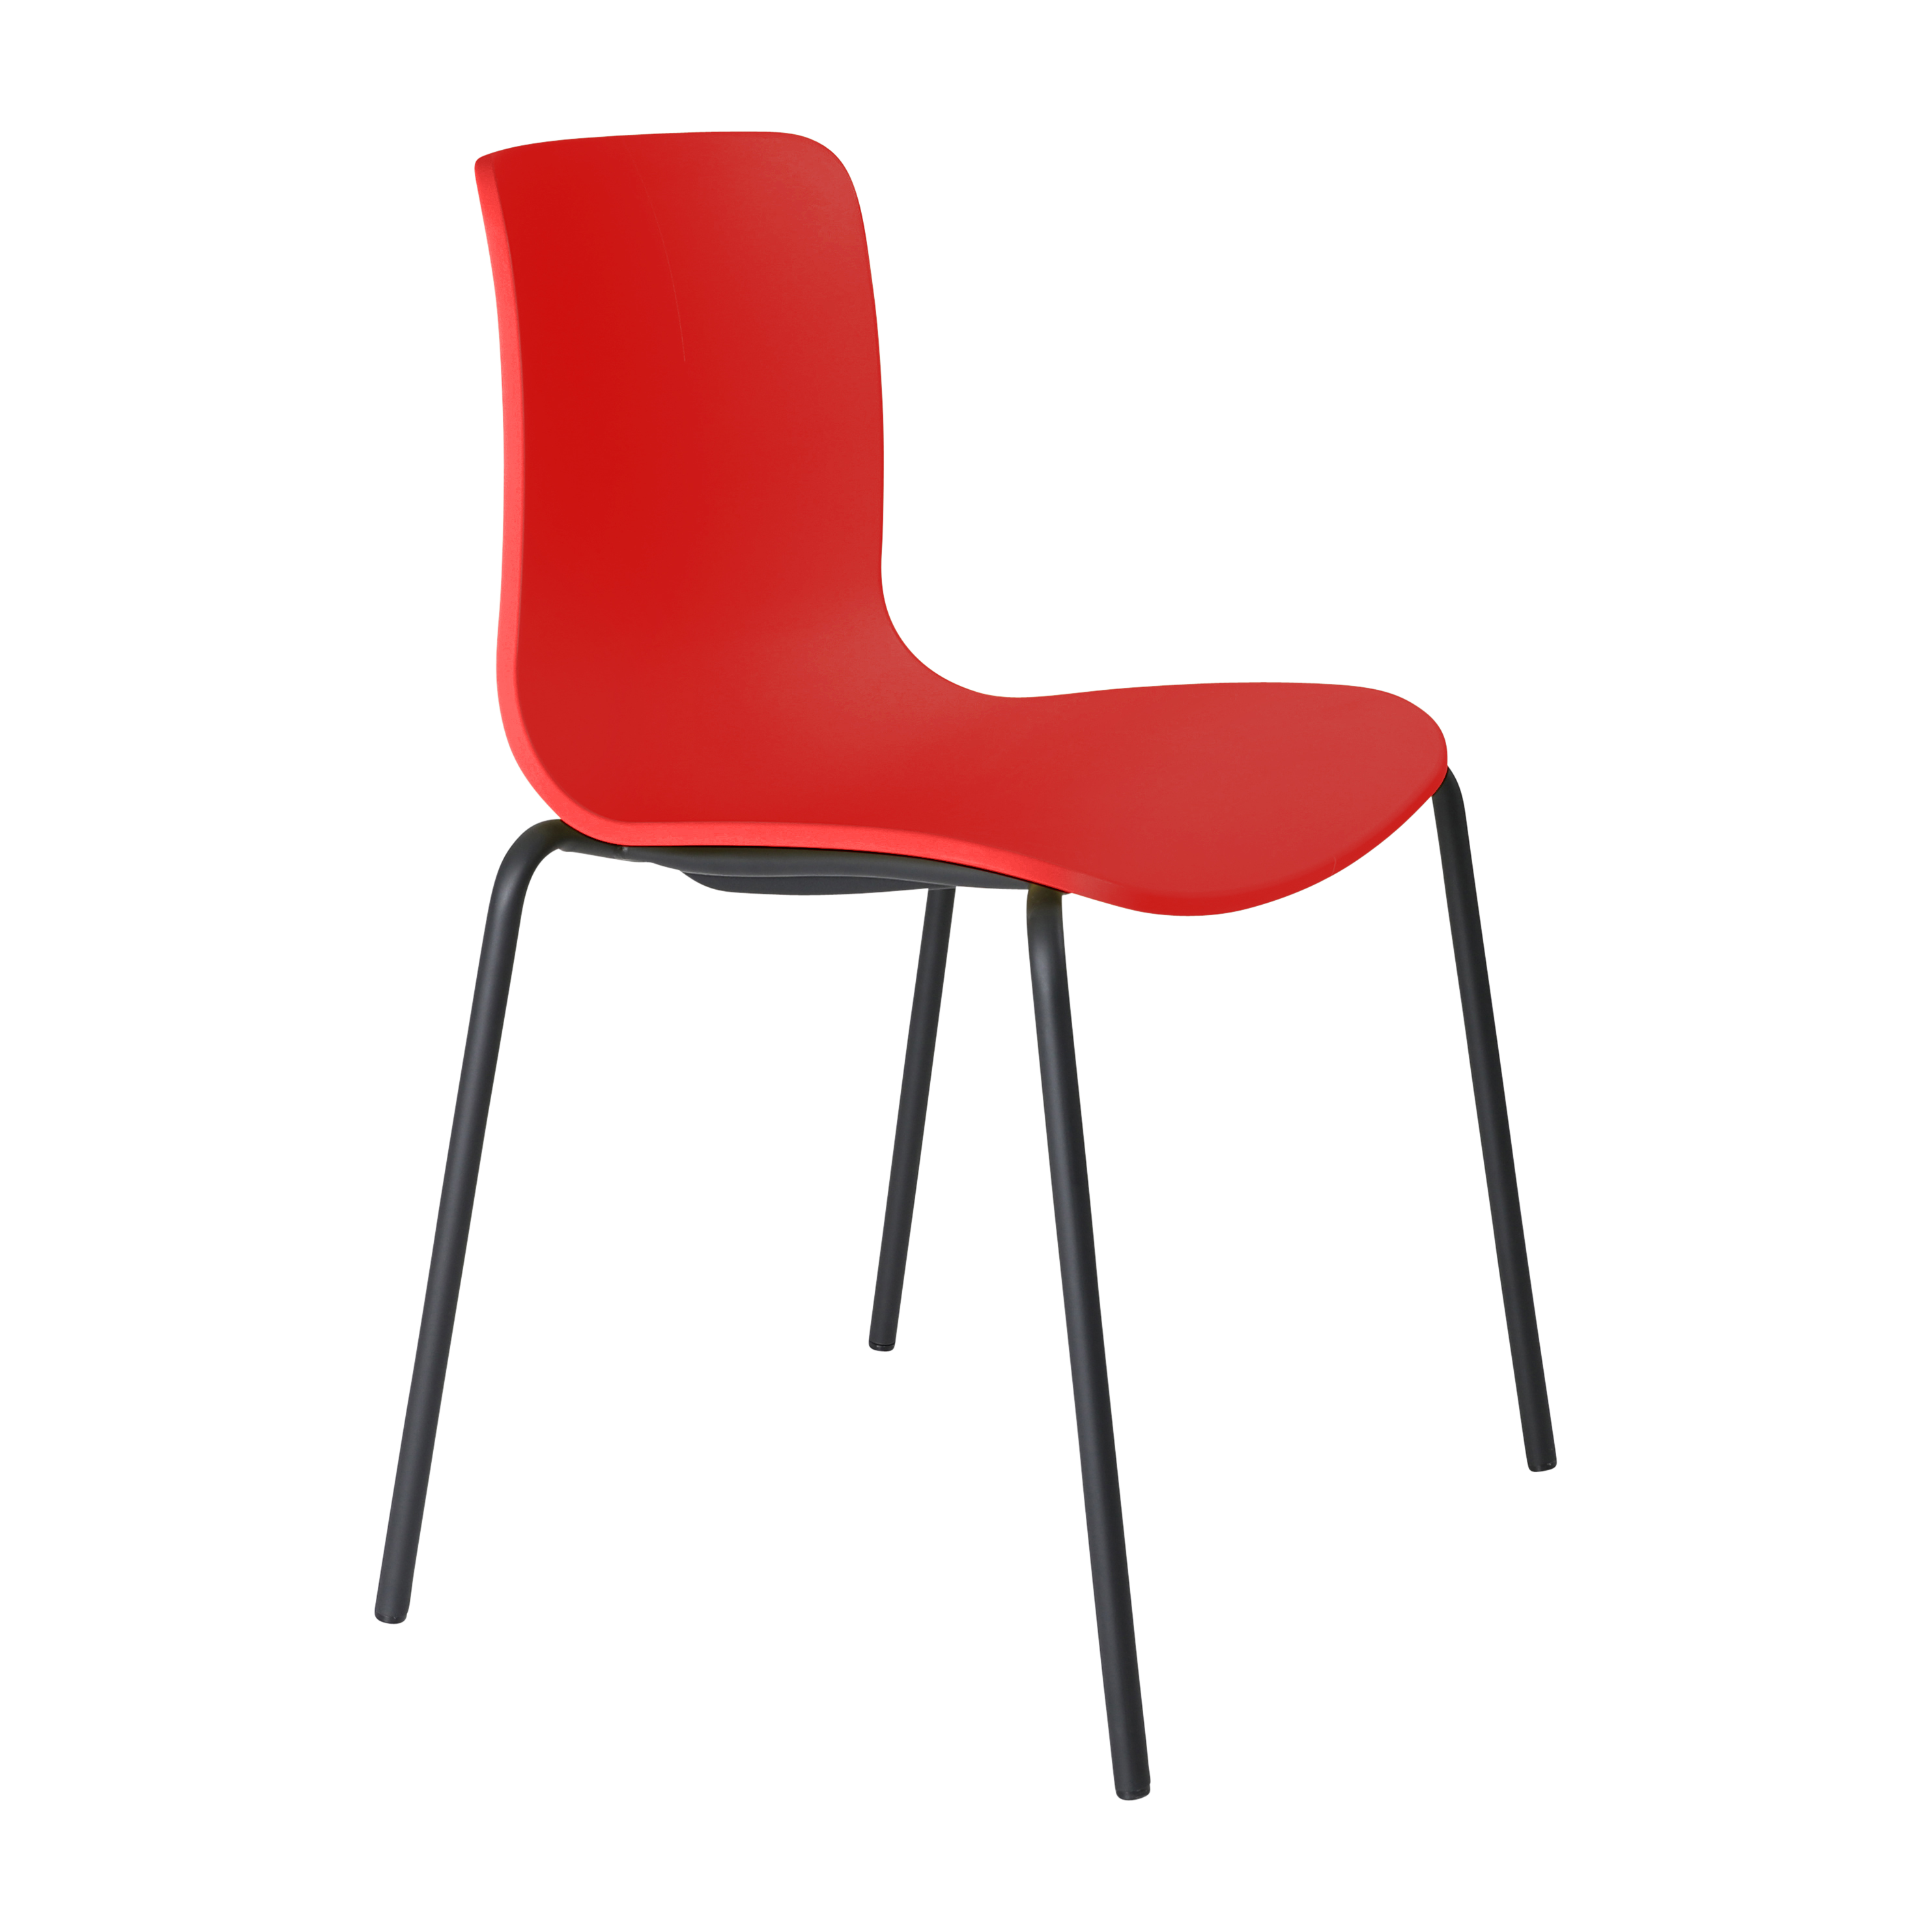 Acti chair